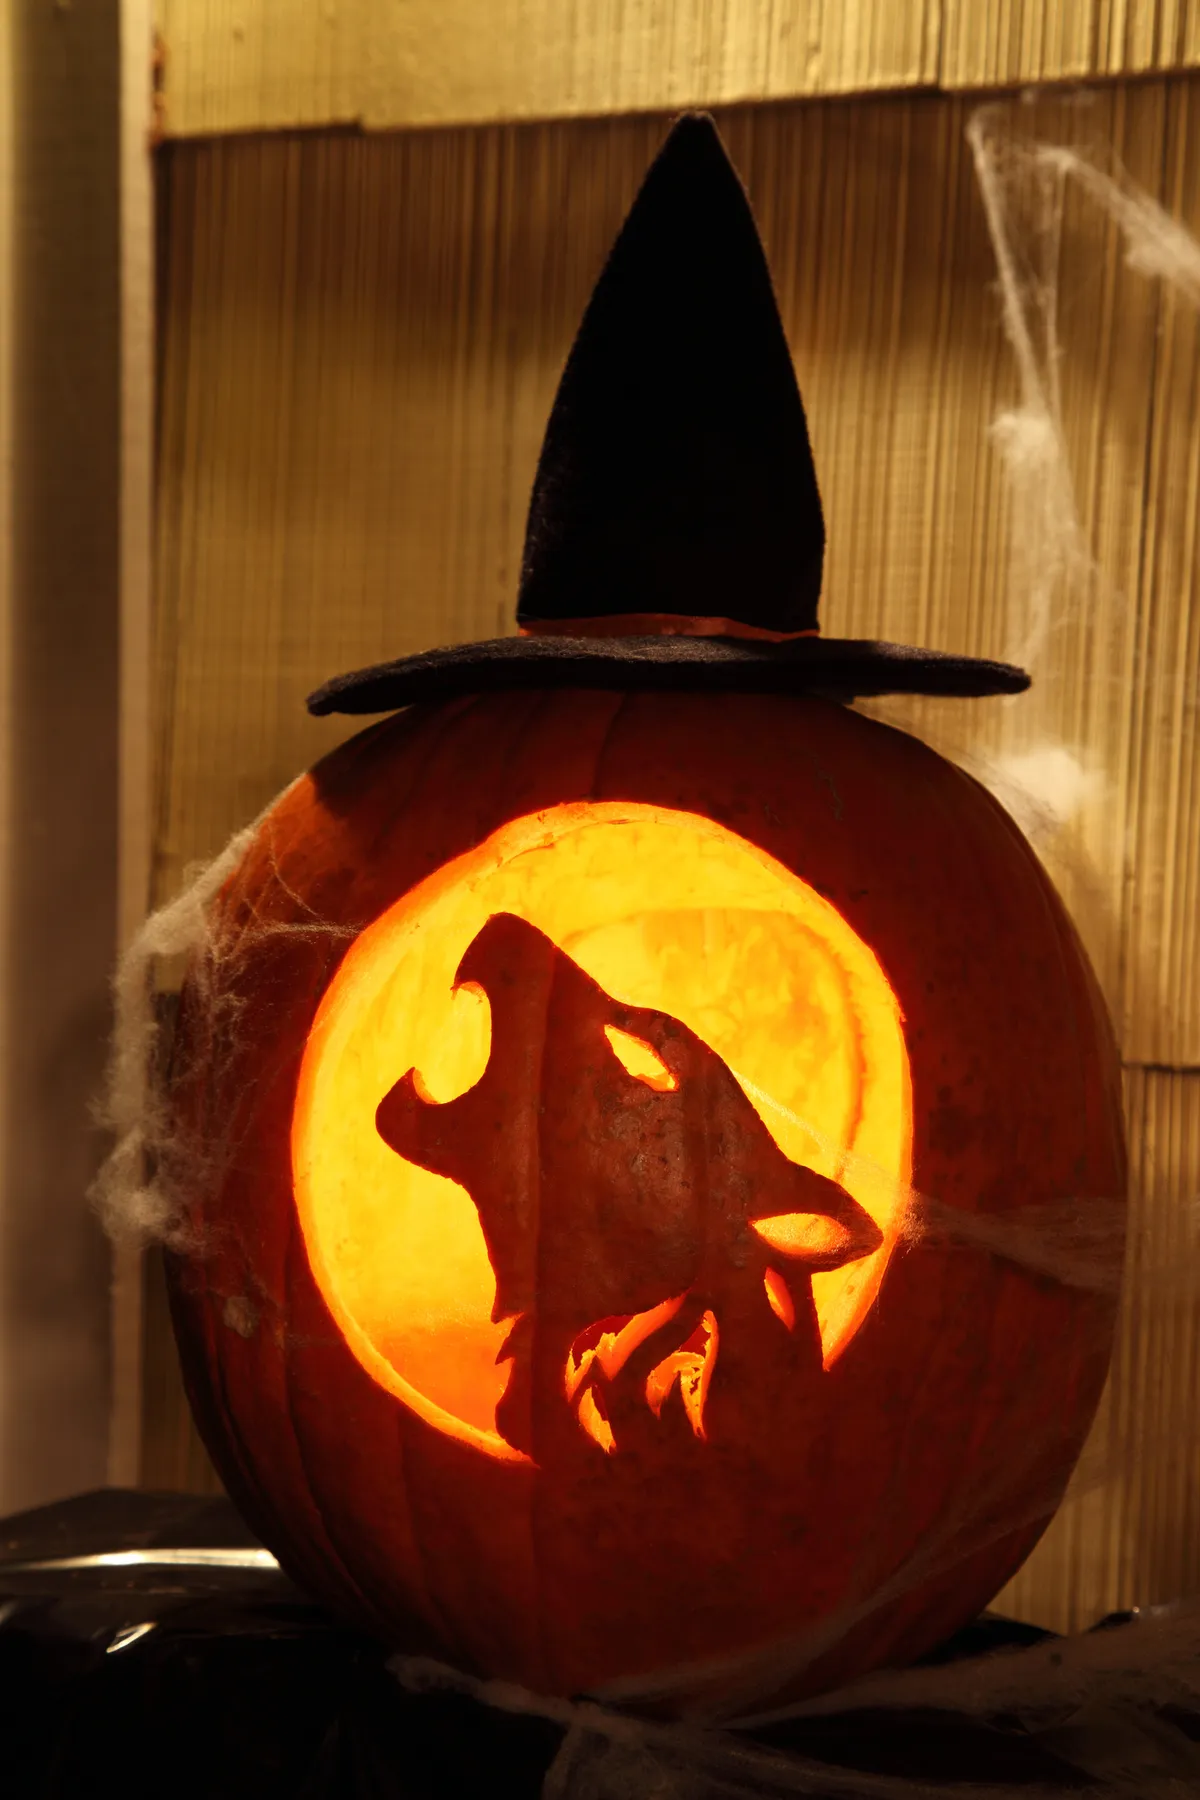 A pumpkin in partial darkness in front of a wooden background, with some fake webbing and a little witches hat on top of the pumpkin. The pumpkin is illuminated from within, showing a howling wolf carving.